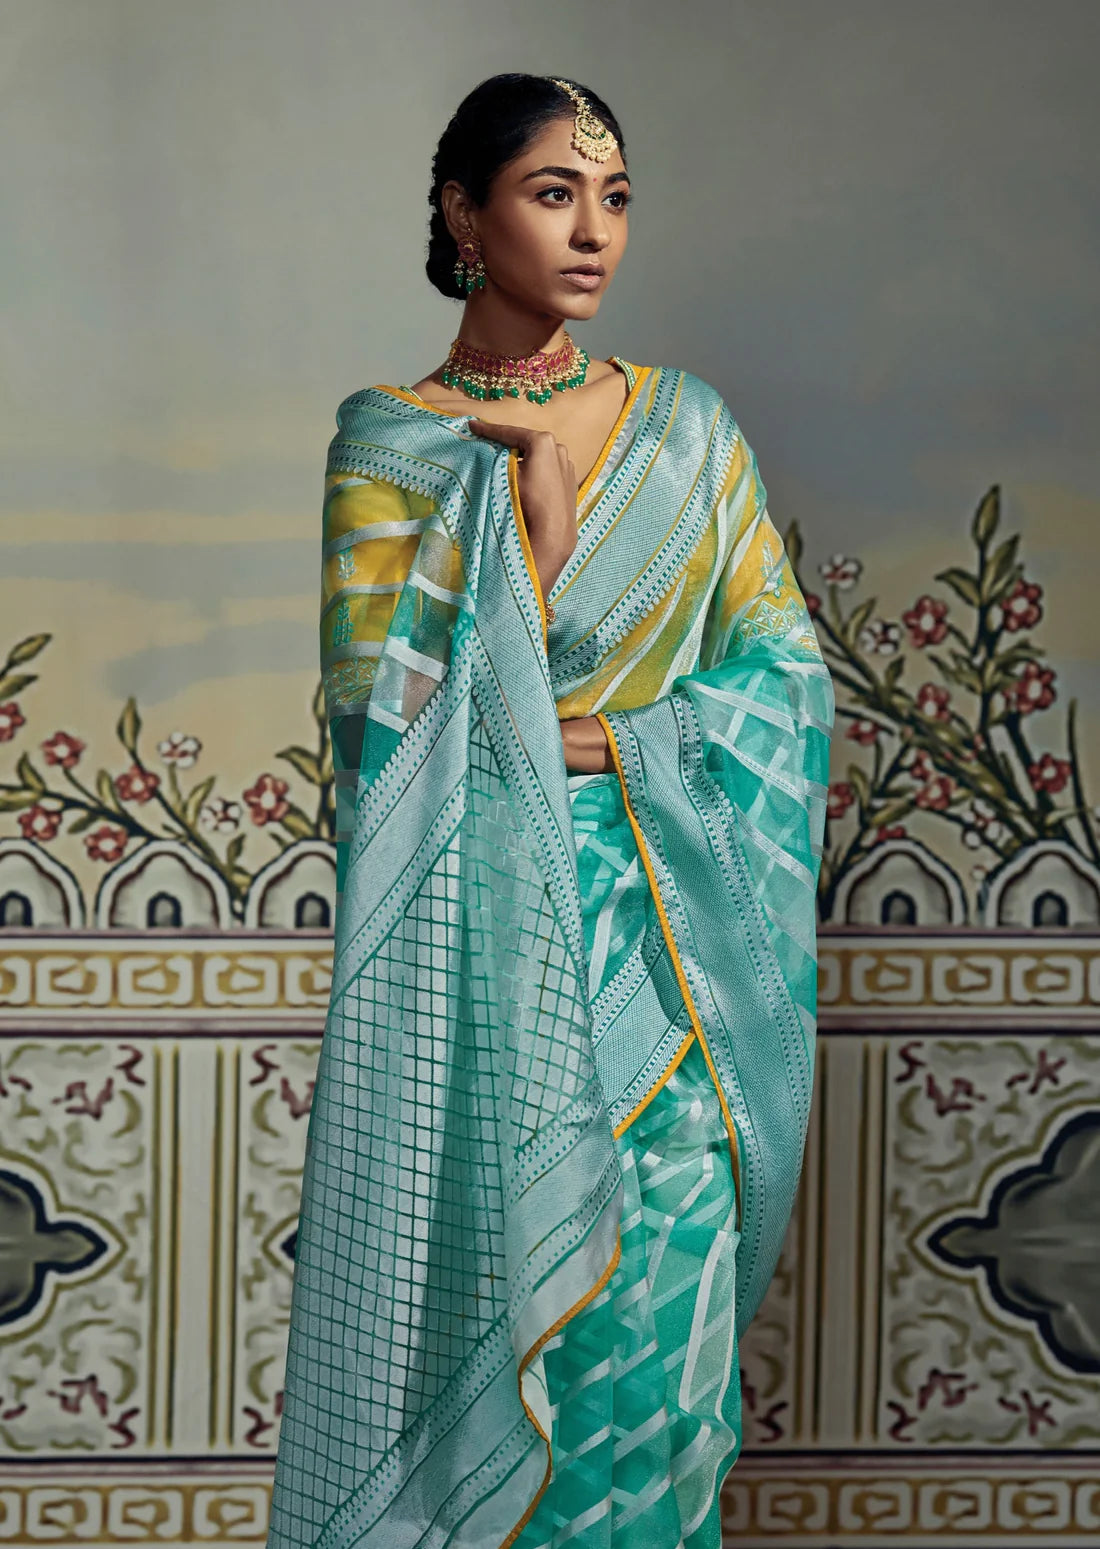 bride in soft brasso silk turquoise blue saree wearing mang tikka, necklace & earrings